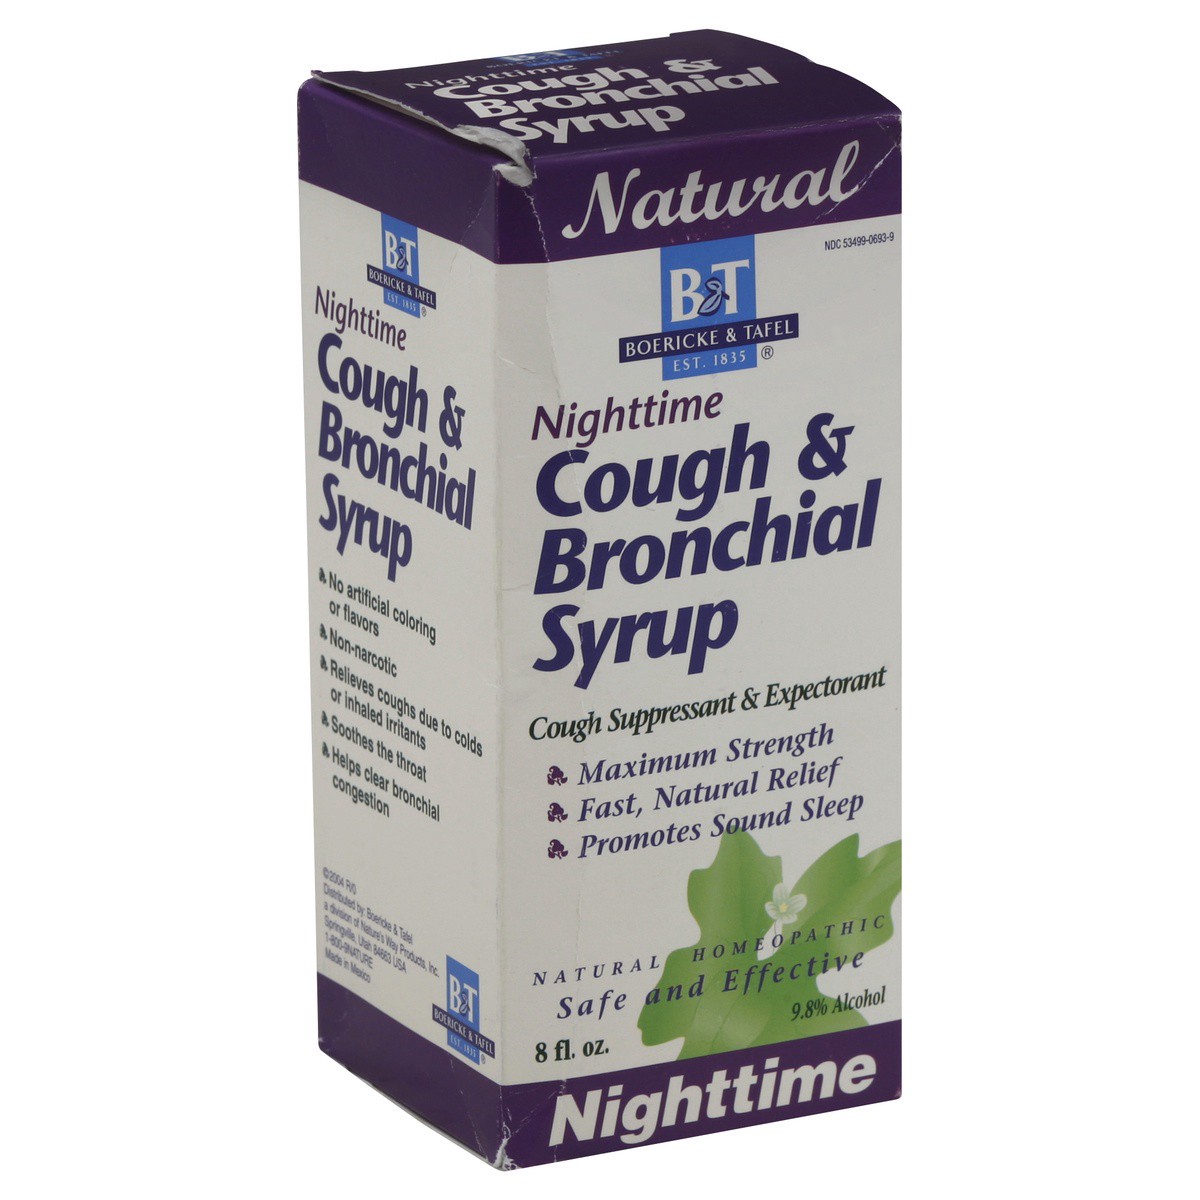 slide 1 of 6, Boericke & Tafel B&T Nighttime Cough & Bronchial Syrup for Restful Sleep Homeopathic, 8 Oz. (Nature's Way Brands), 8 fl oz